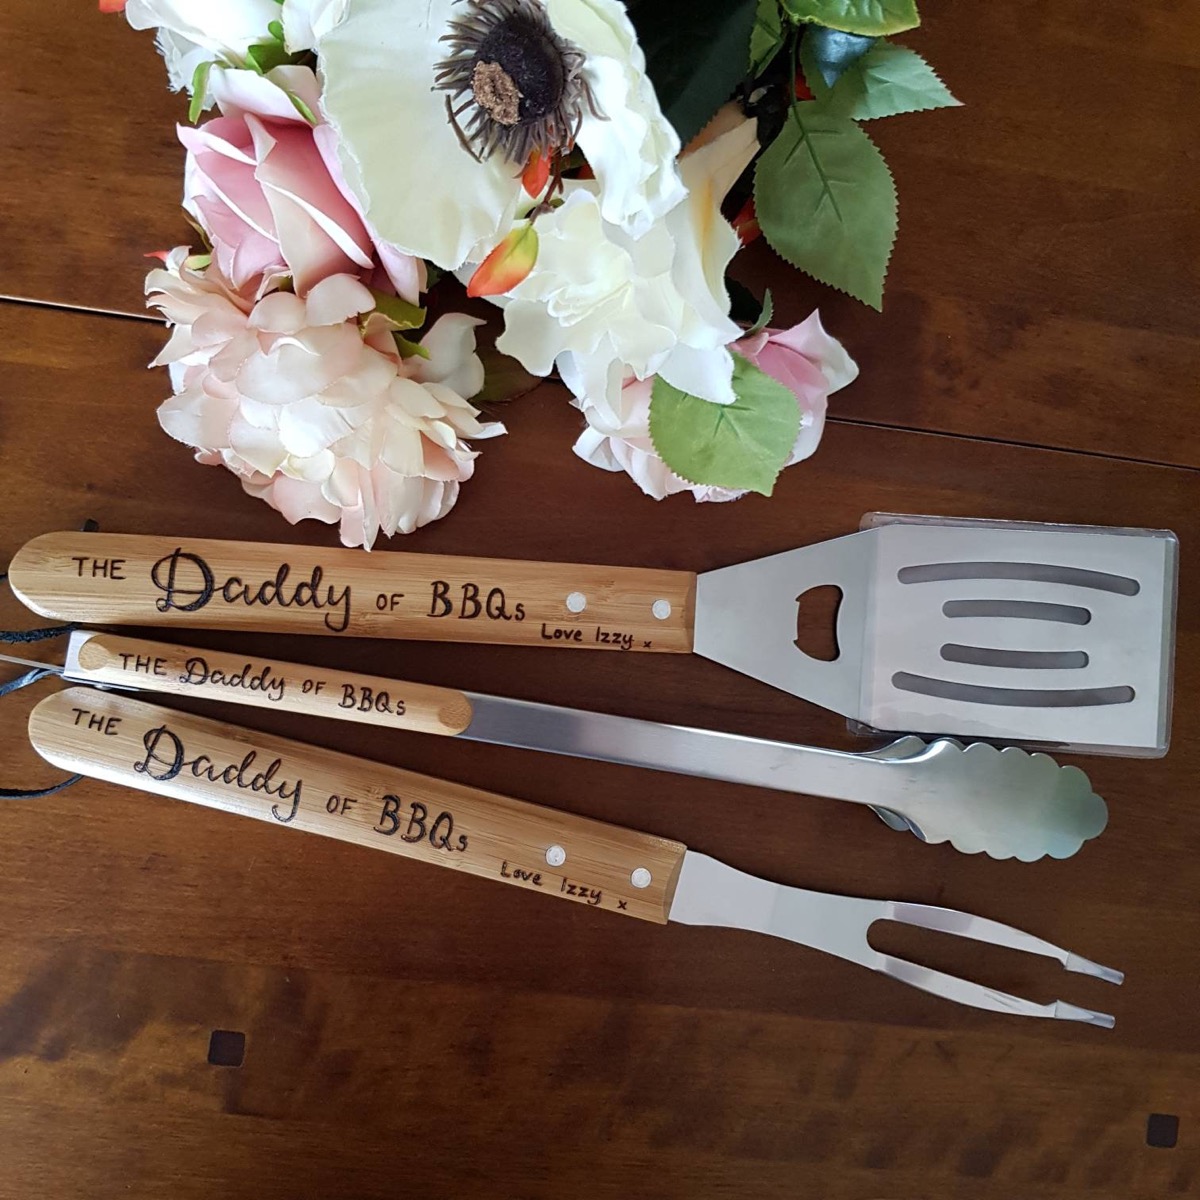 set of three barbecue tools with engraved wooden handles on wood table next to flowers